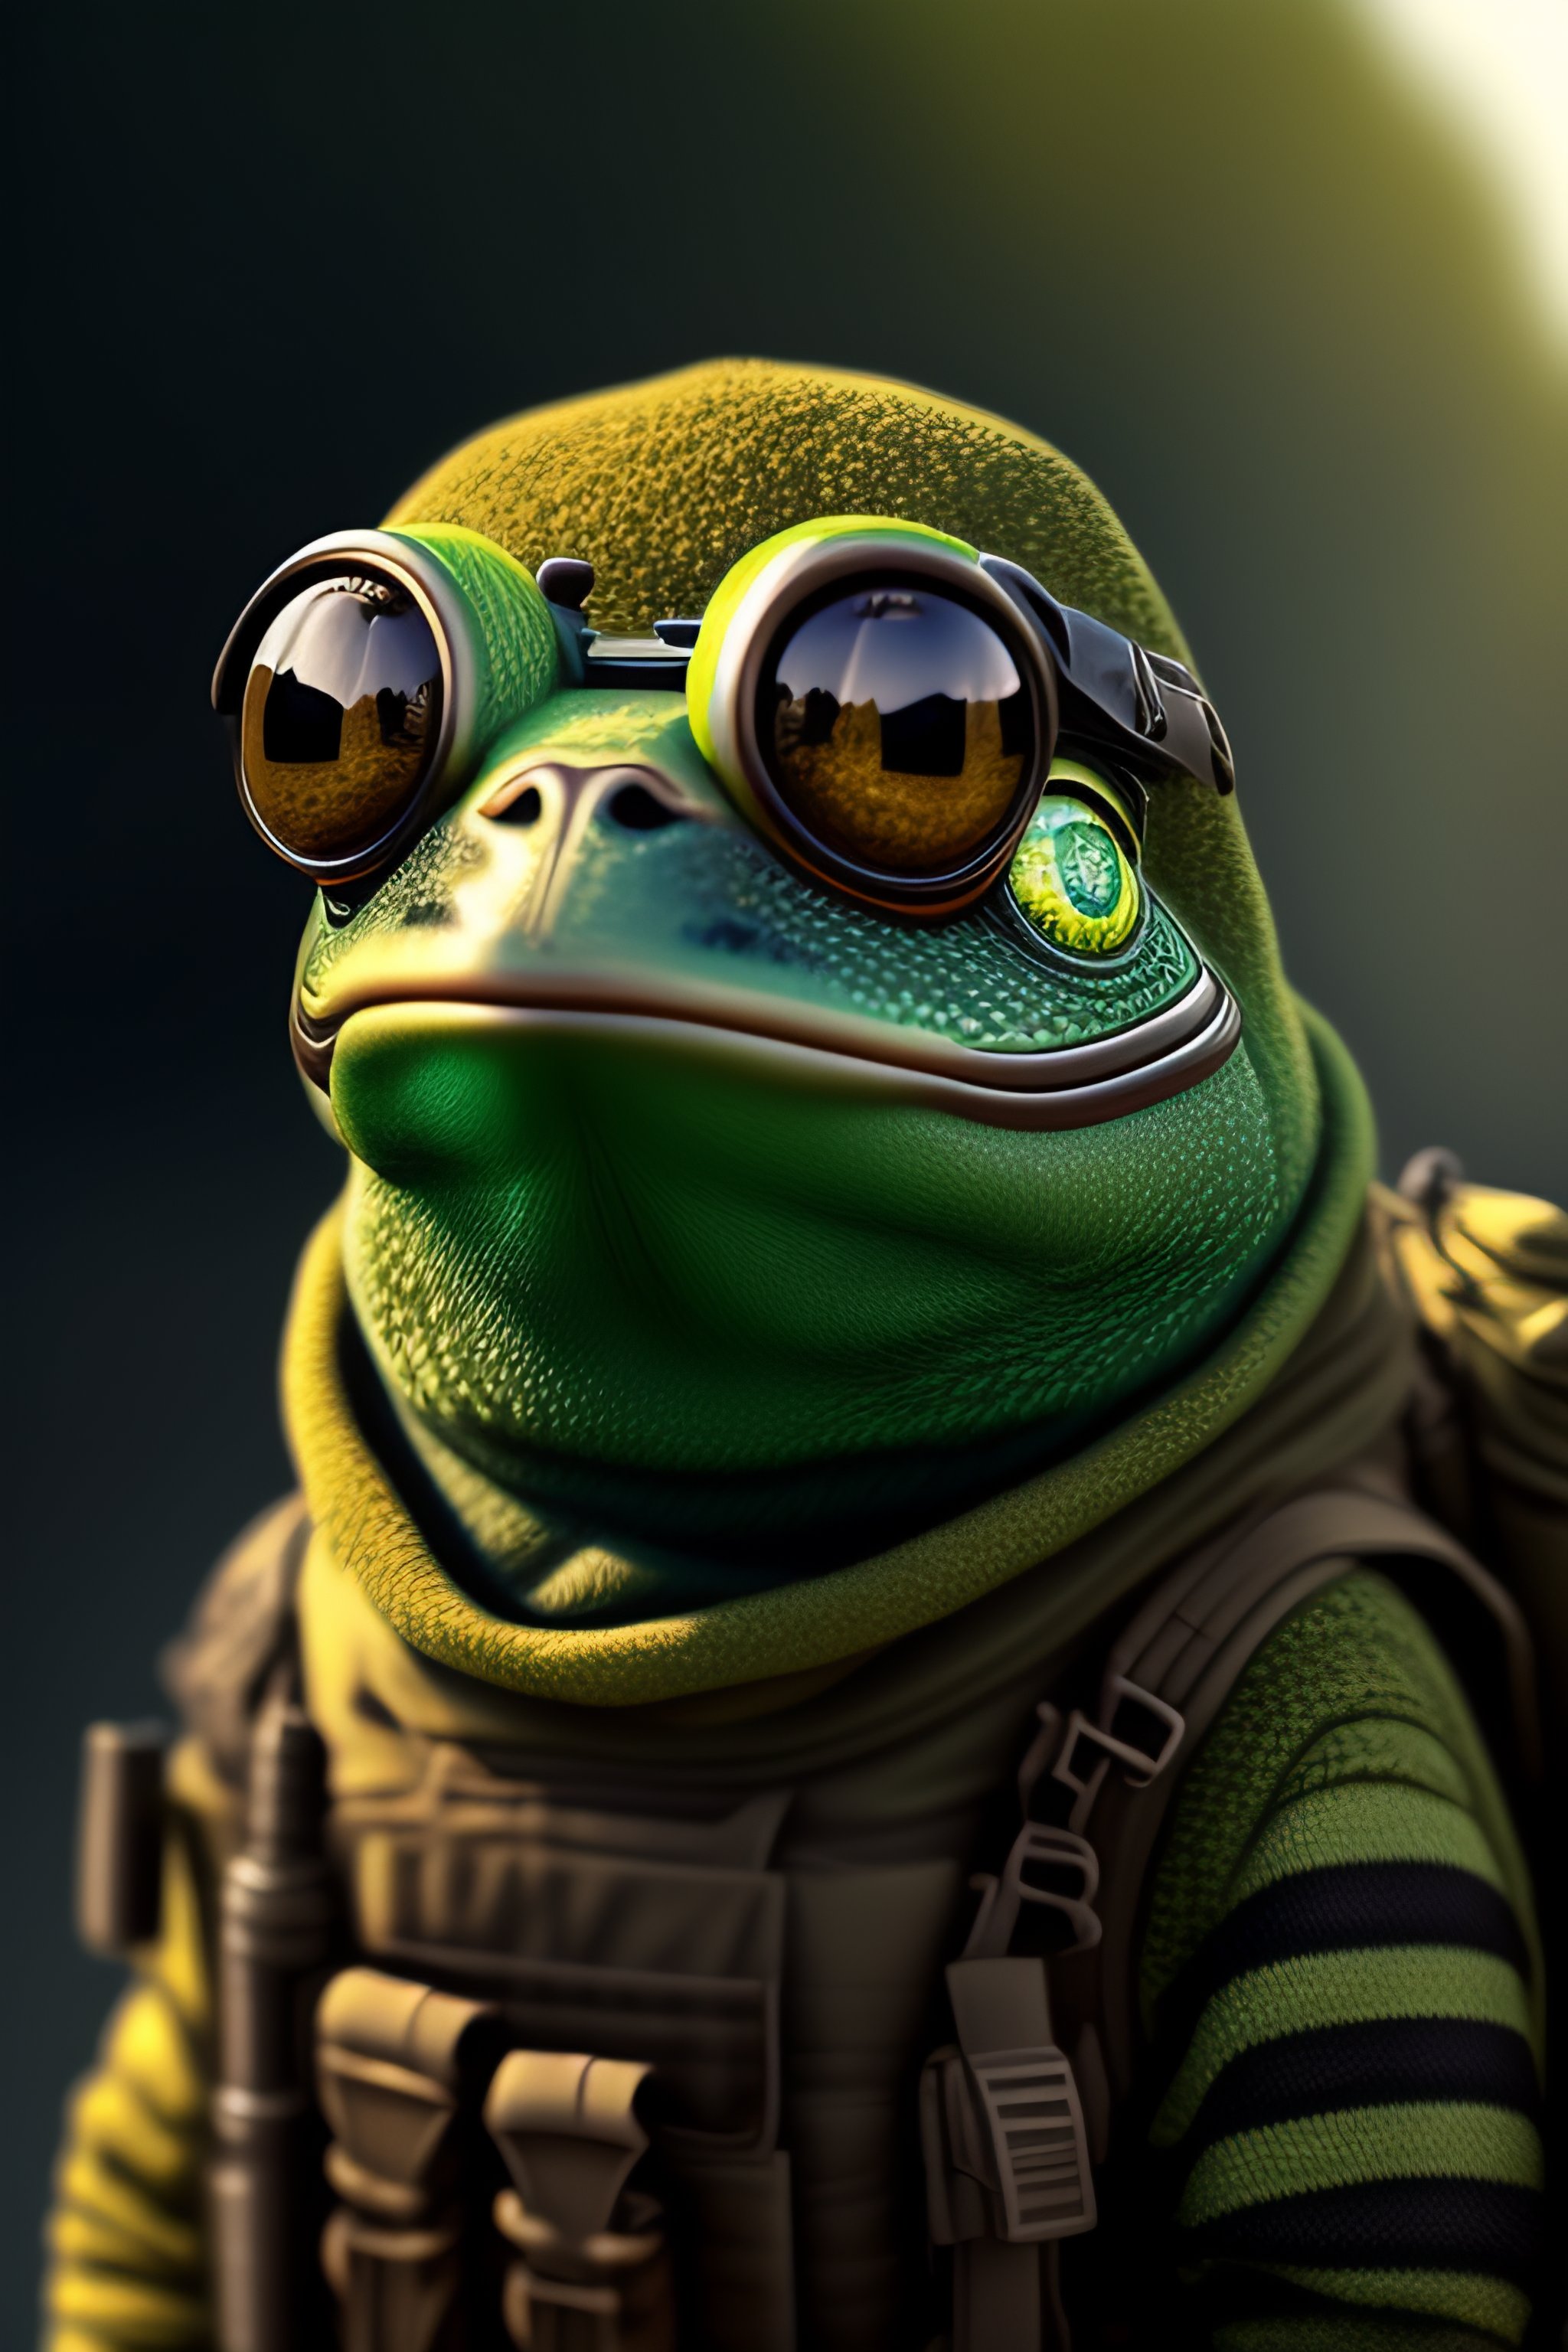 Lexica - Pepe the frog, like a soldier in world war 1, close-up ...